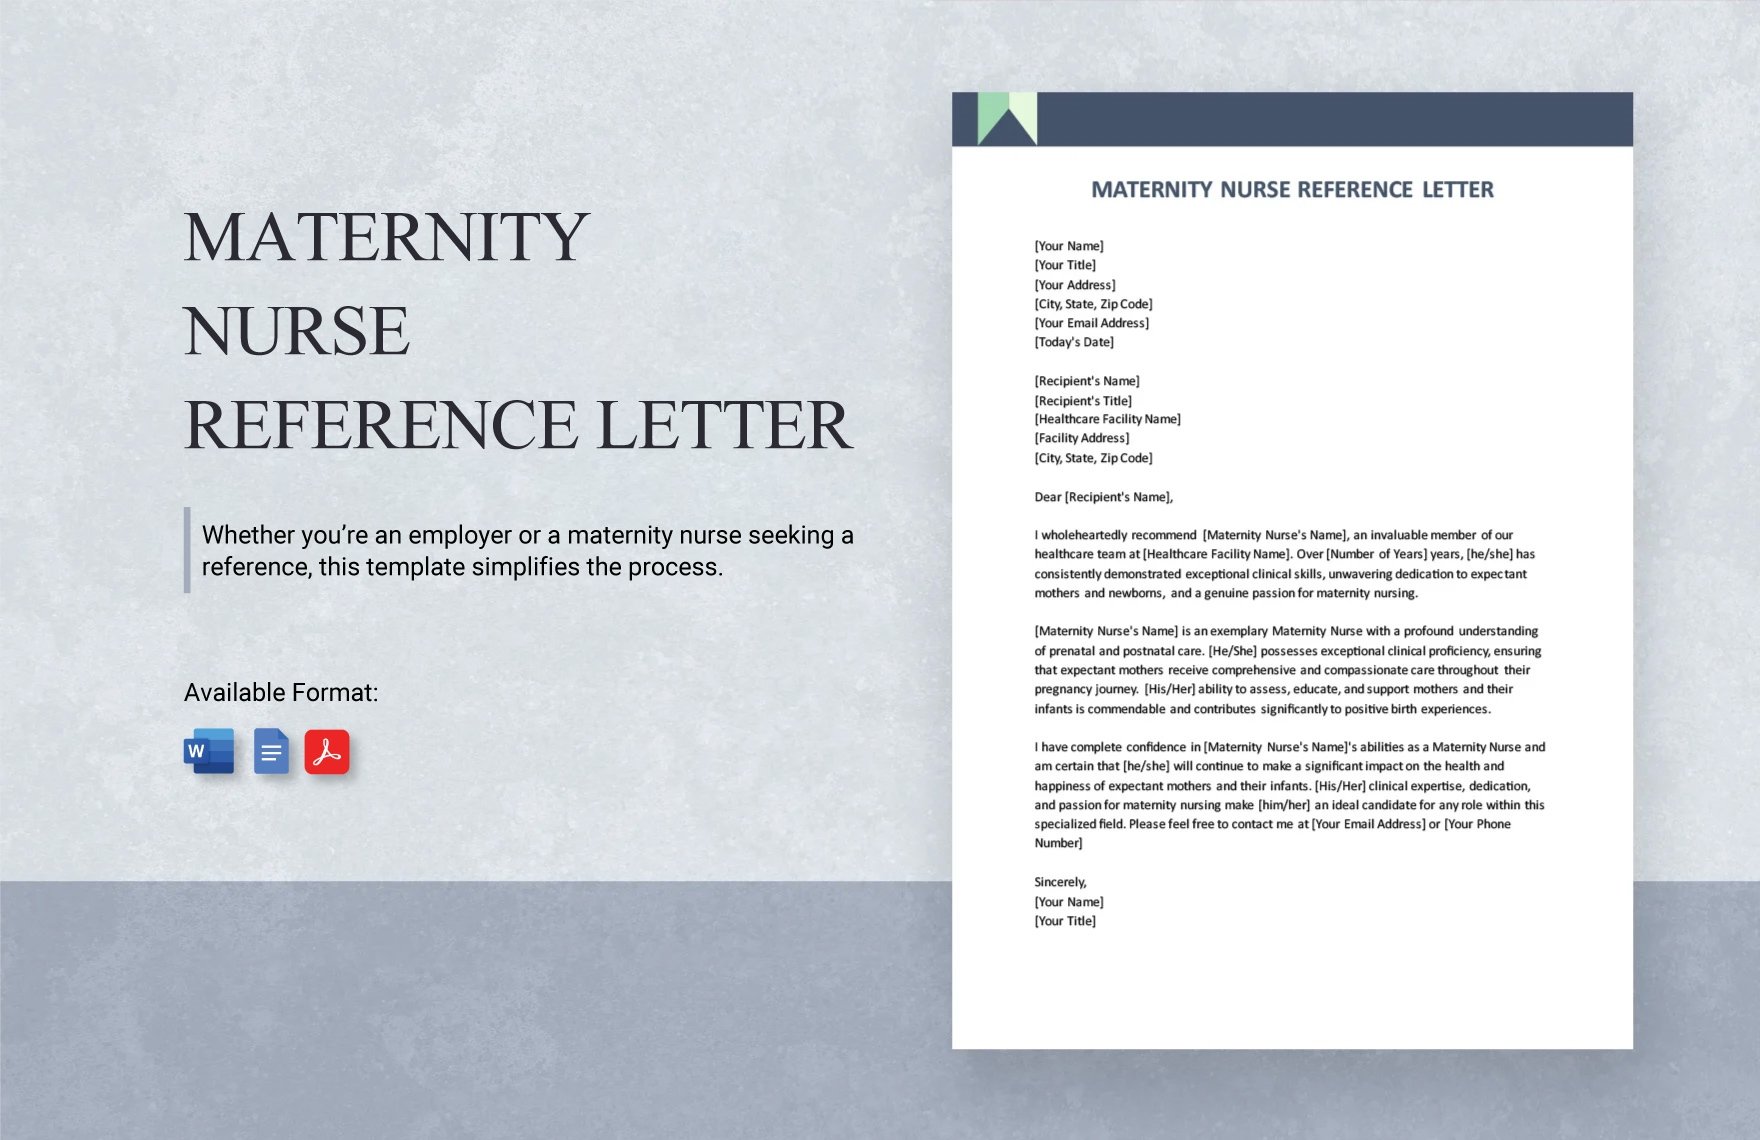 Maternity Nurse Reference Letter in Word, Google Docs, PDF